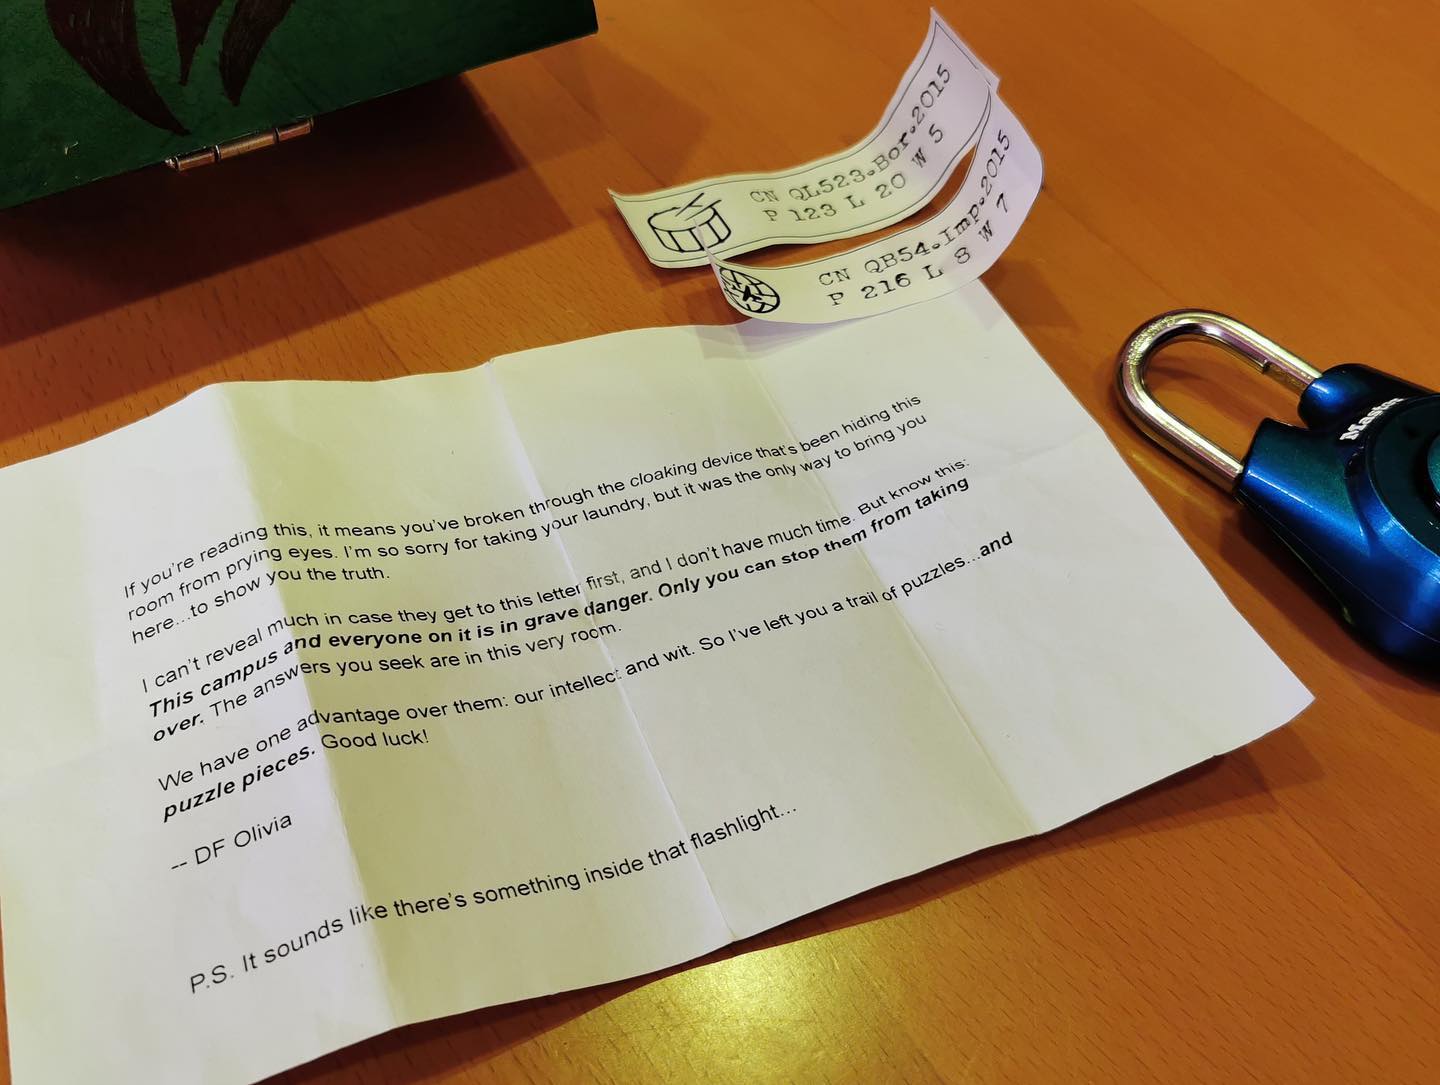 Photograph of a note, some codes on strips of paper, and a directional padlock lying on a wooden table.